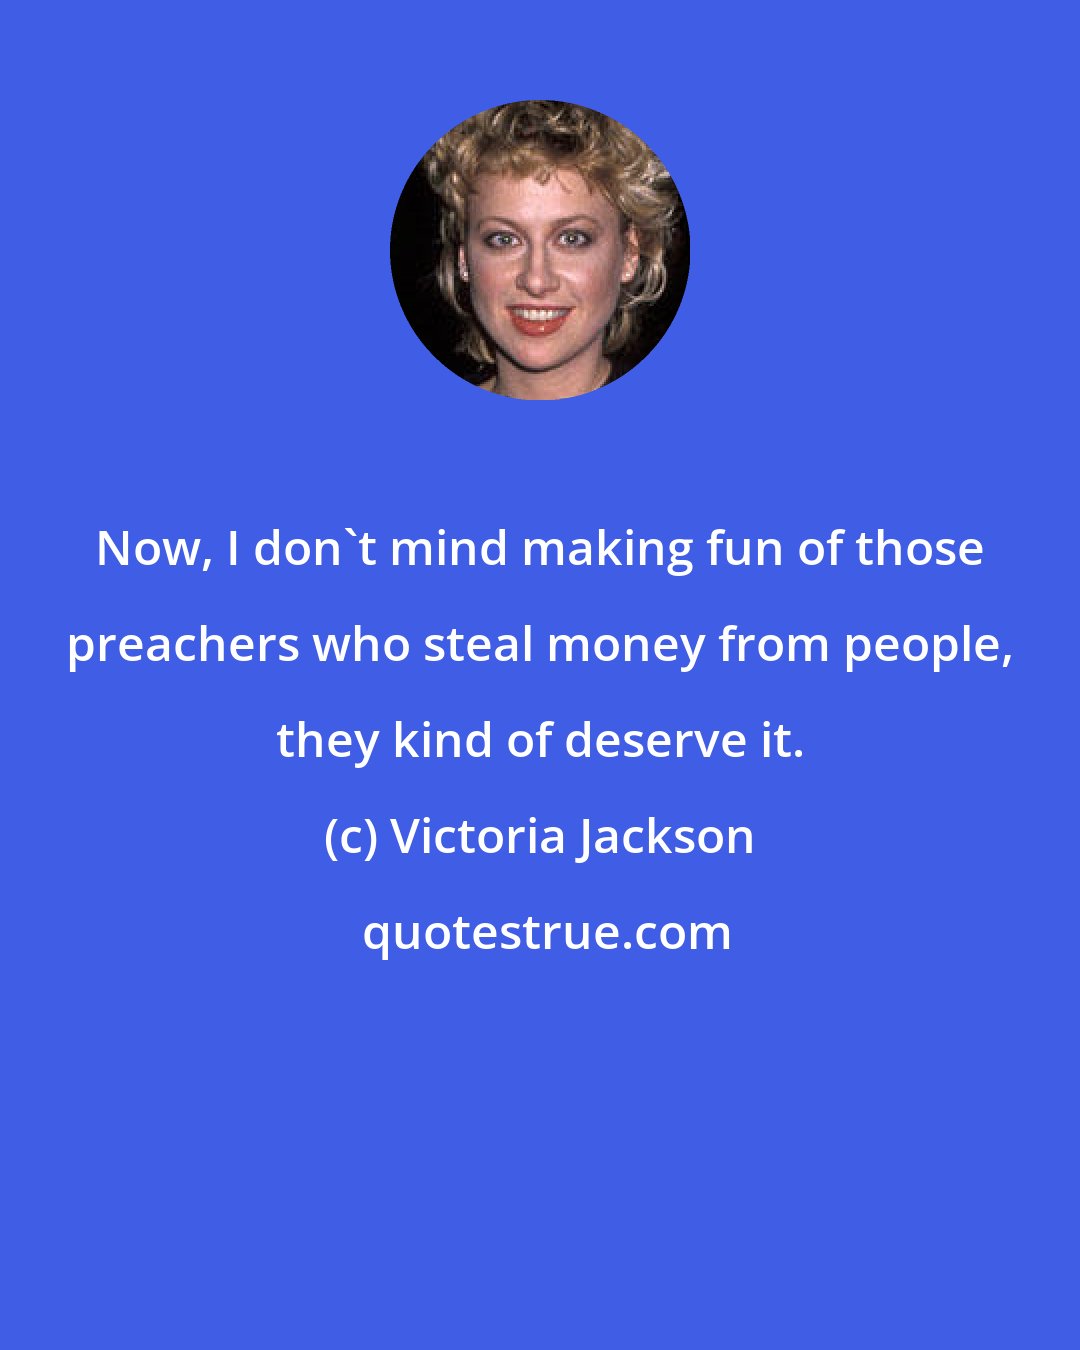 Victoria Jackson: Now, I don't mind making fun of those preachers who steal money from people, they kind of deserve it.